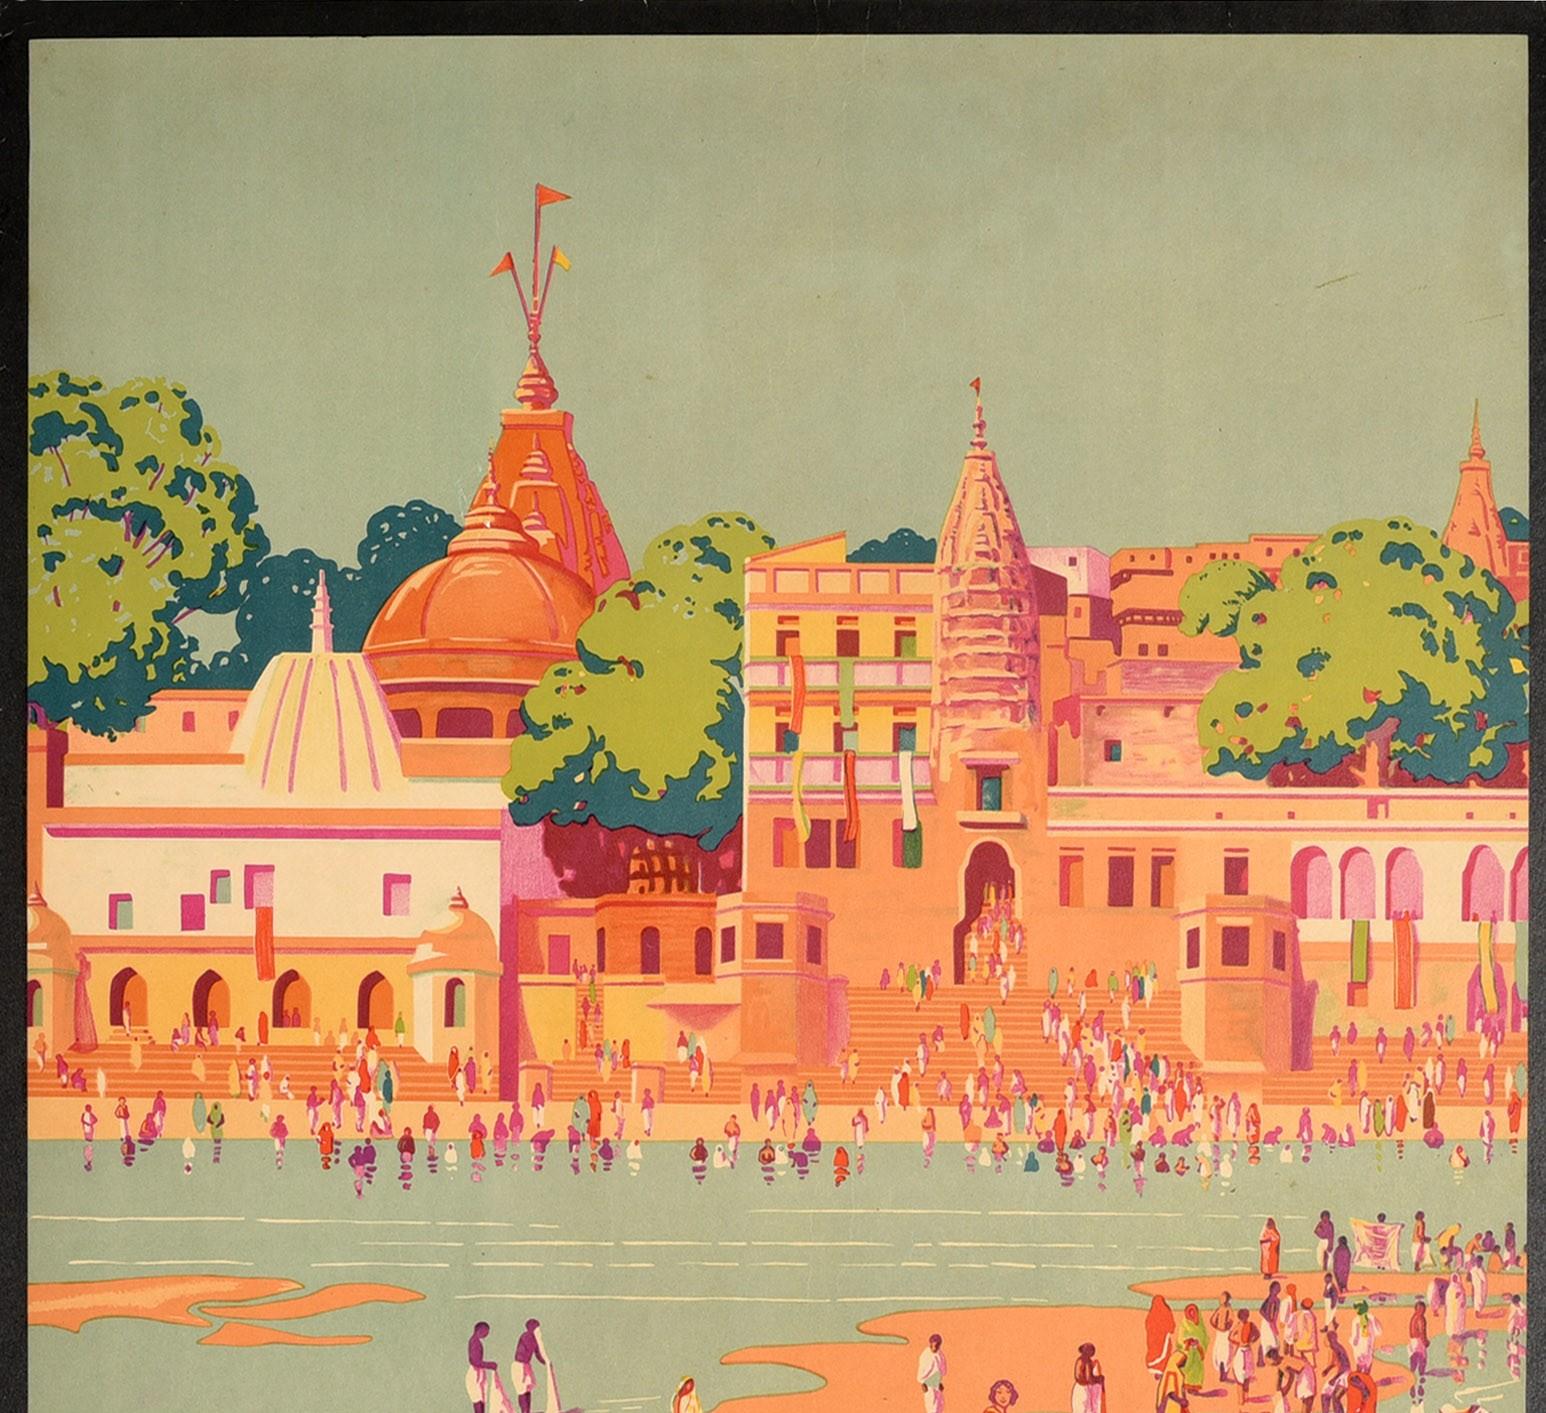 Original vintage travel poster for Gaya / ??? in India featuring stunning and colourful artwork by Gobinda Mandal depicting a view towards a temple nestled between trees with people walking down the steps and washing in the river on both sides, a